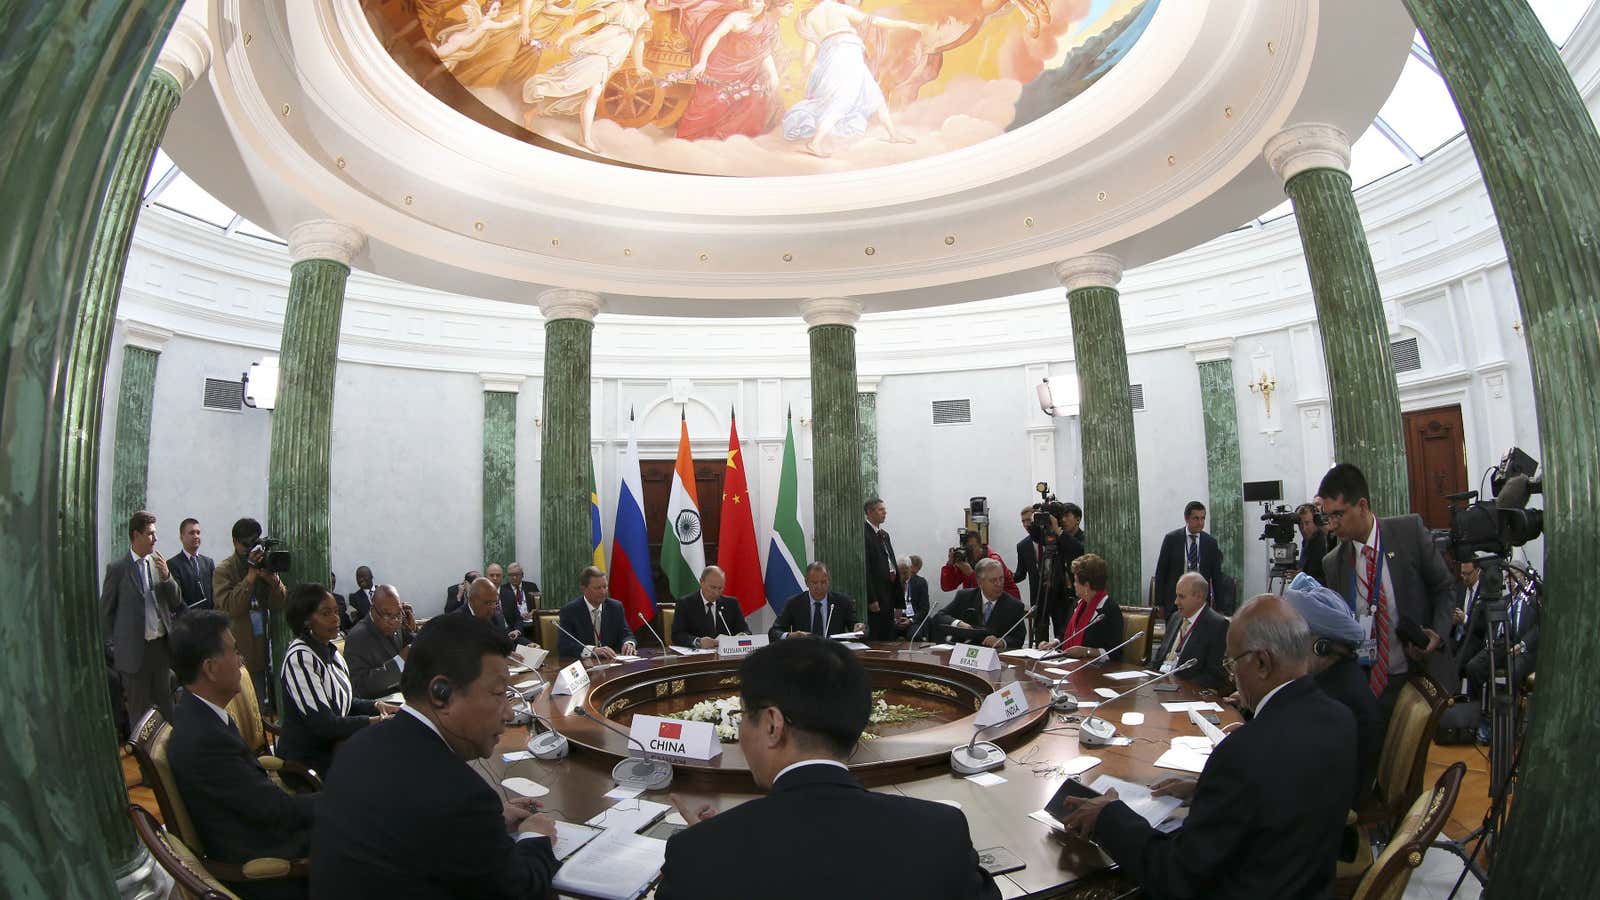 The BRICS leaders’ meeting at the 2013 G20 Summit in Strelna, Russia.